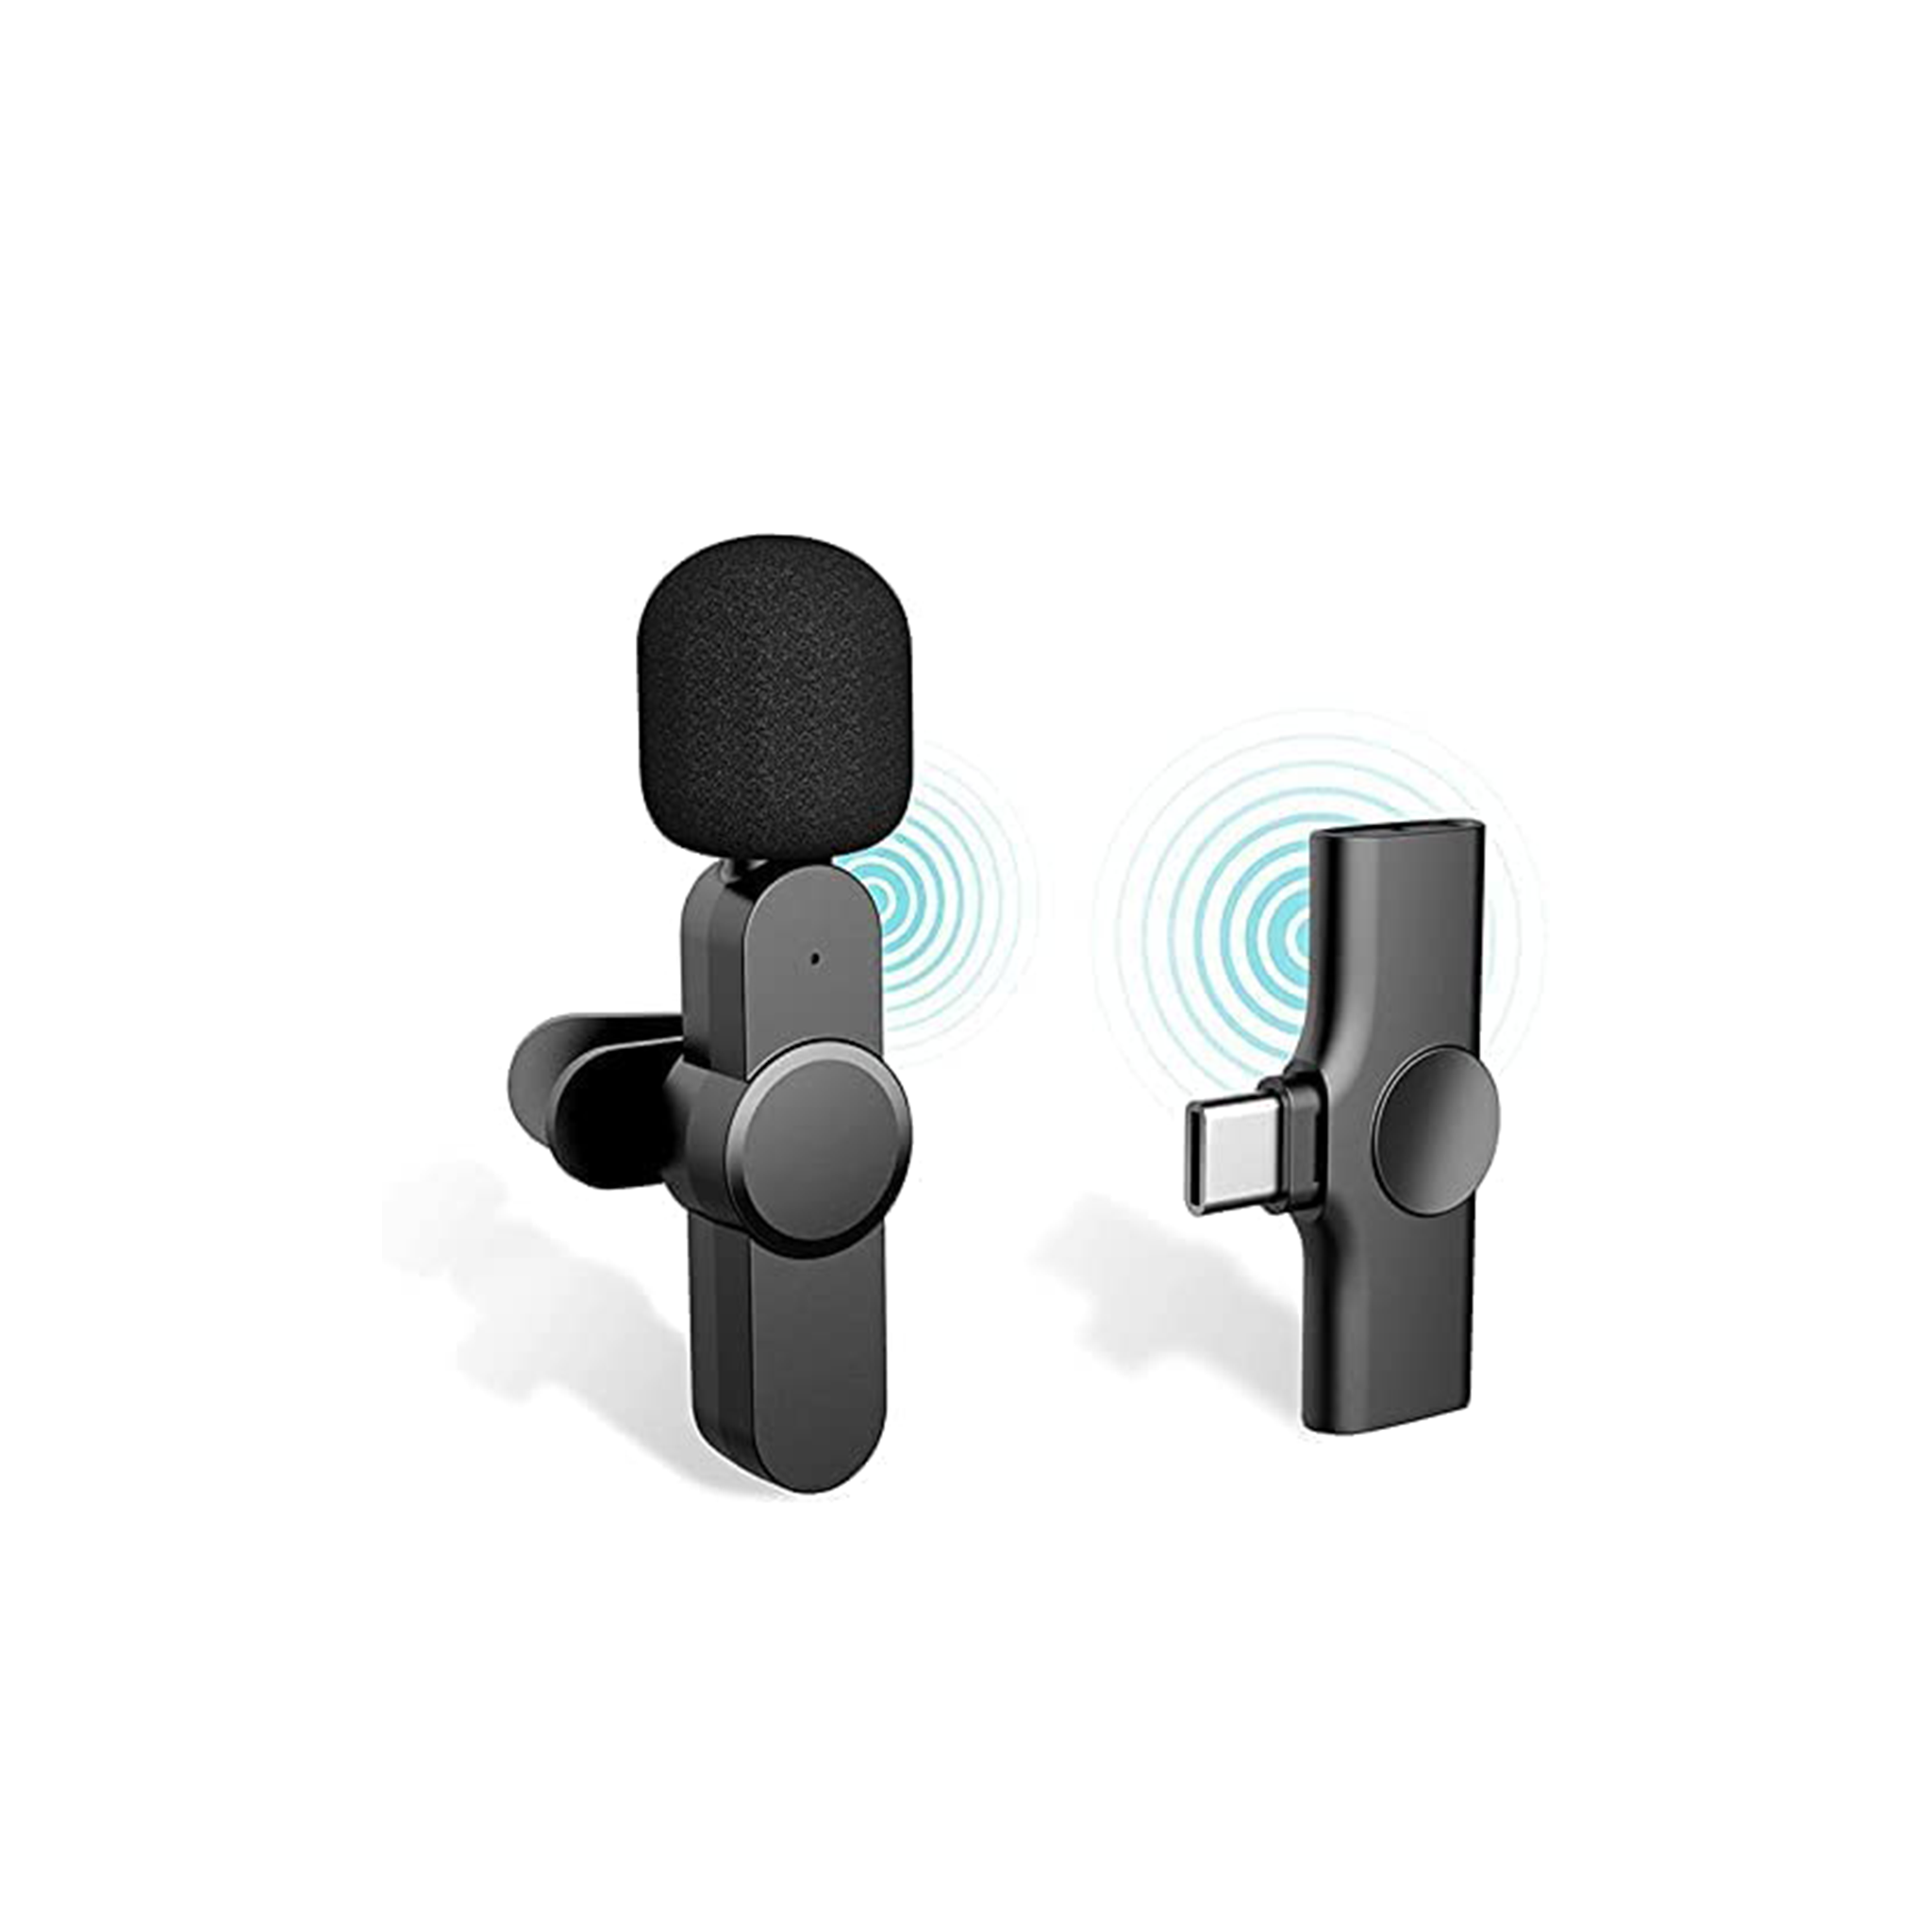 Wireless Microphone For Iphone To type-c F5